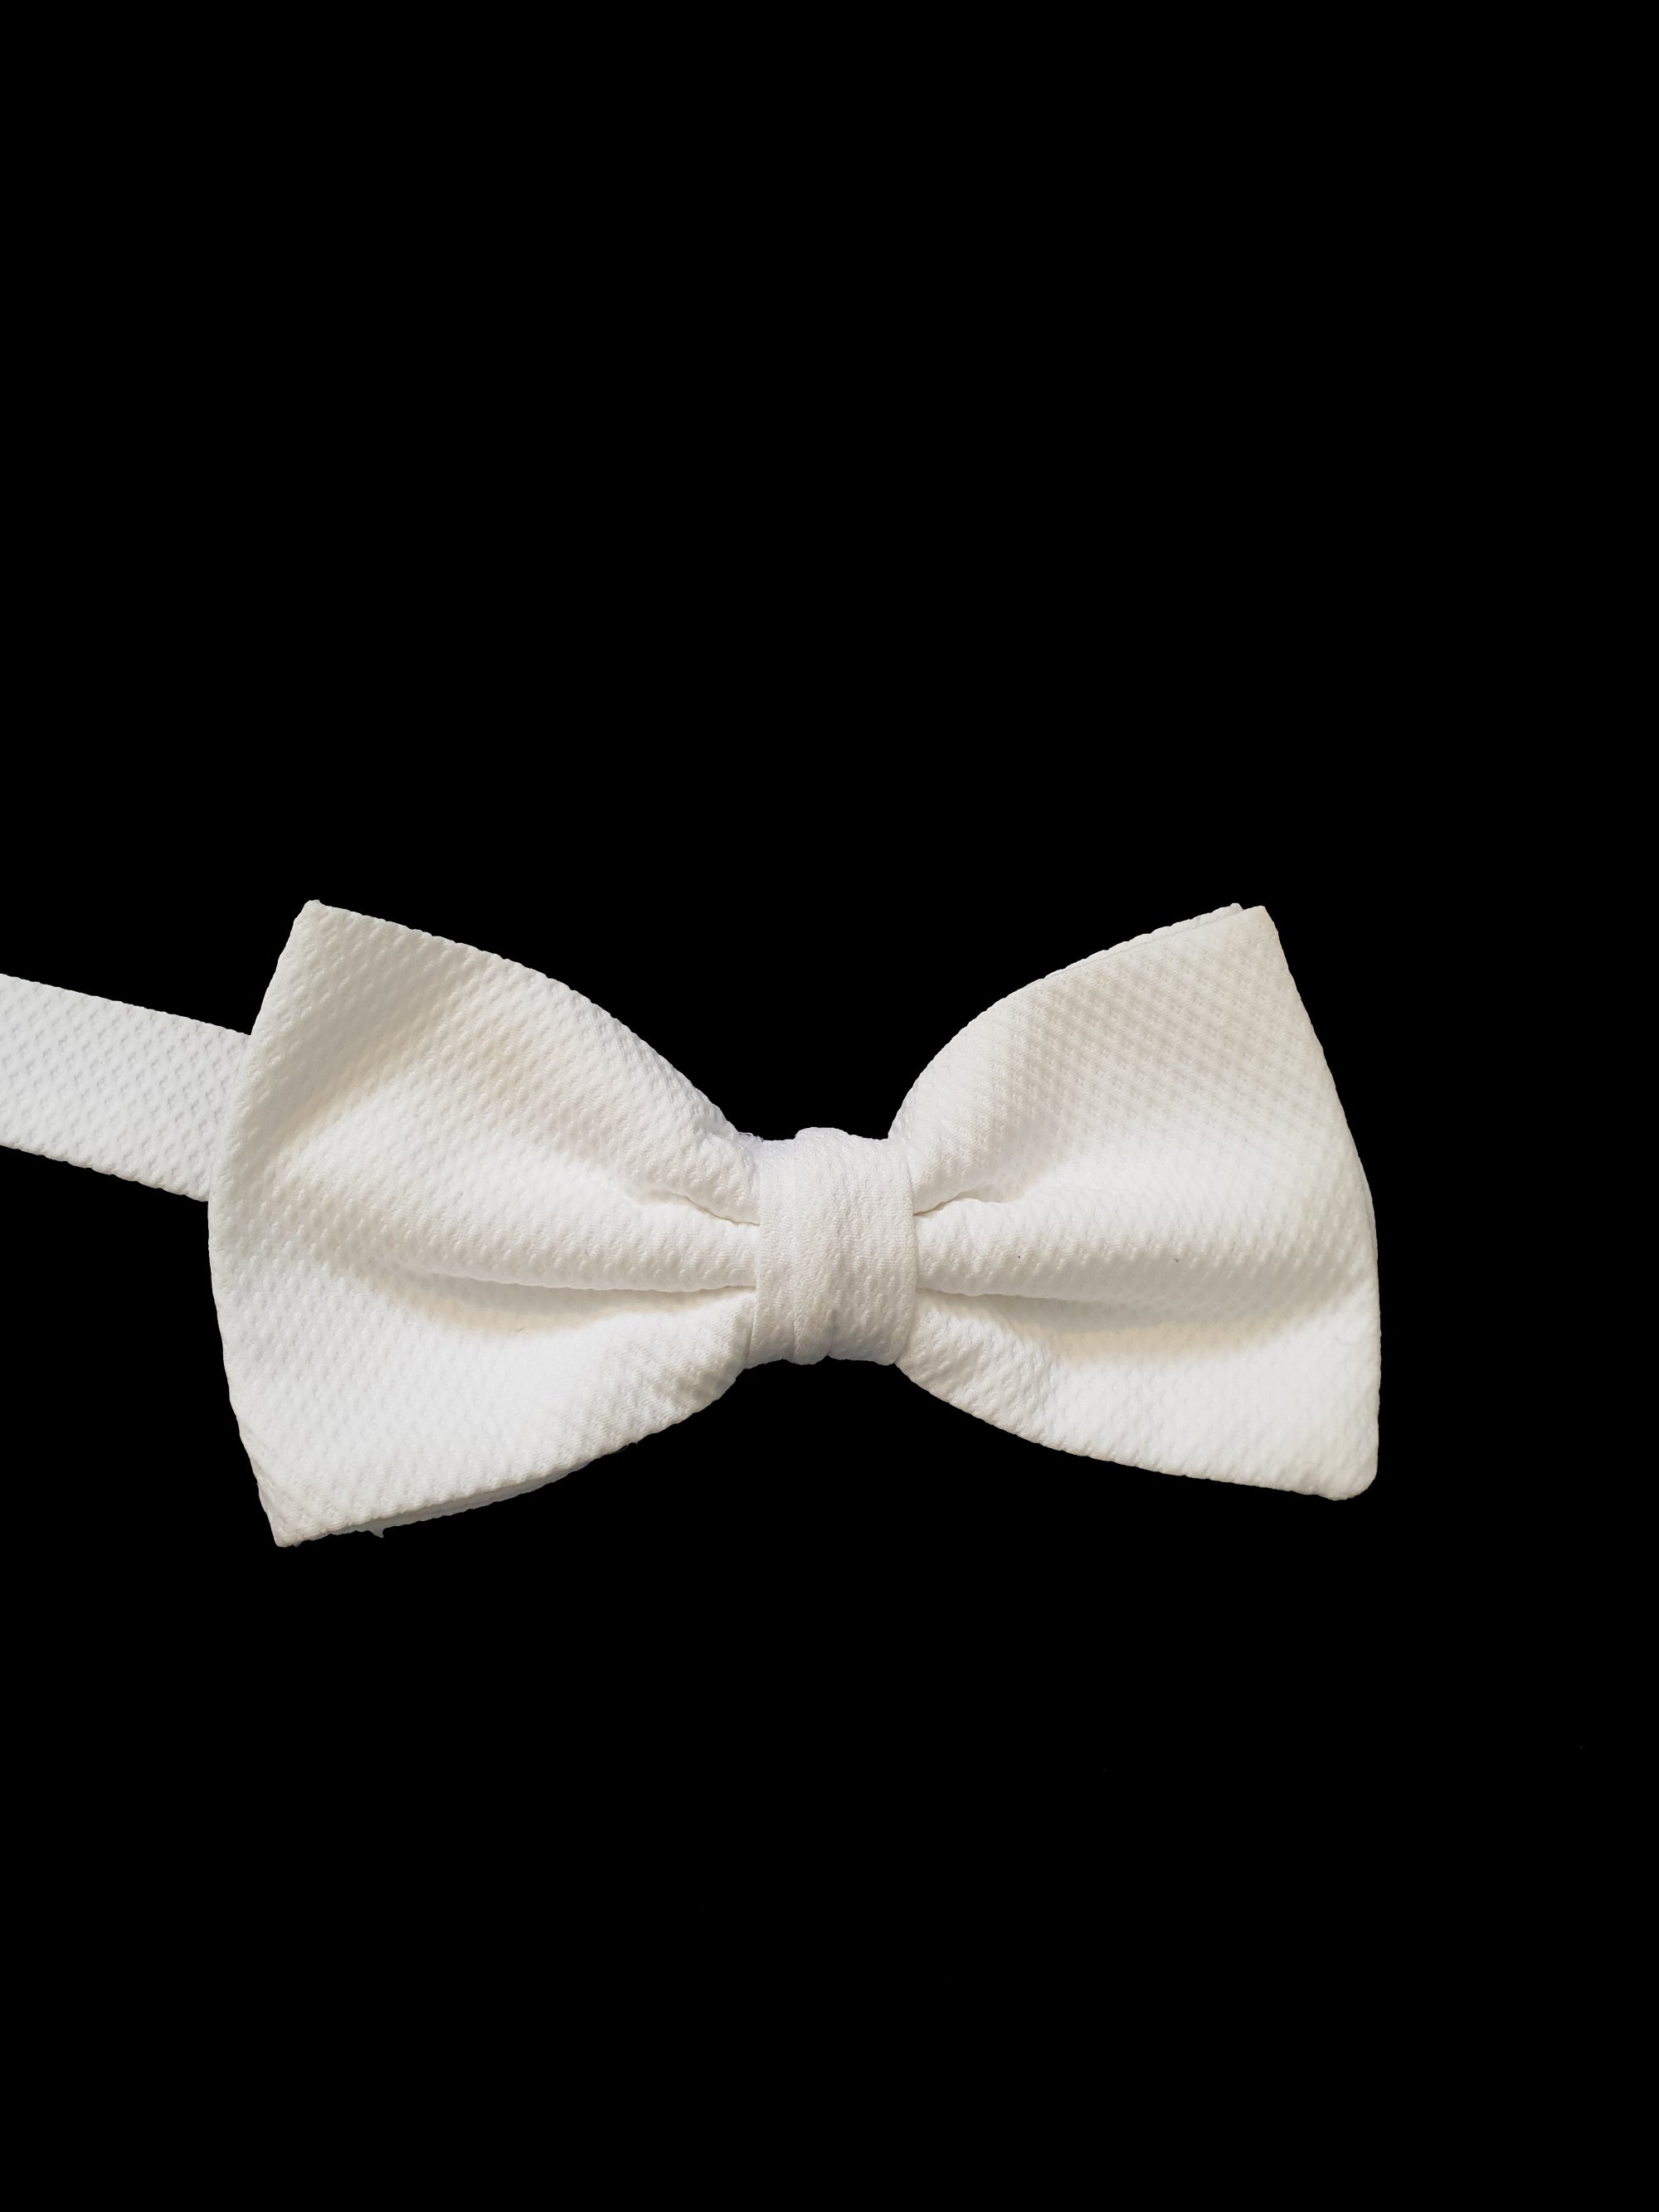 Selection of White Marcella Bow Ties - White Tie Formal